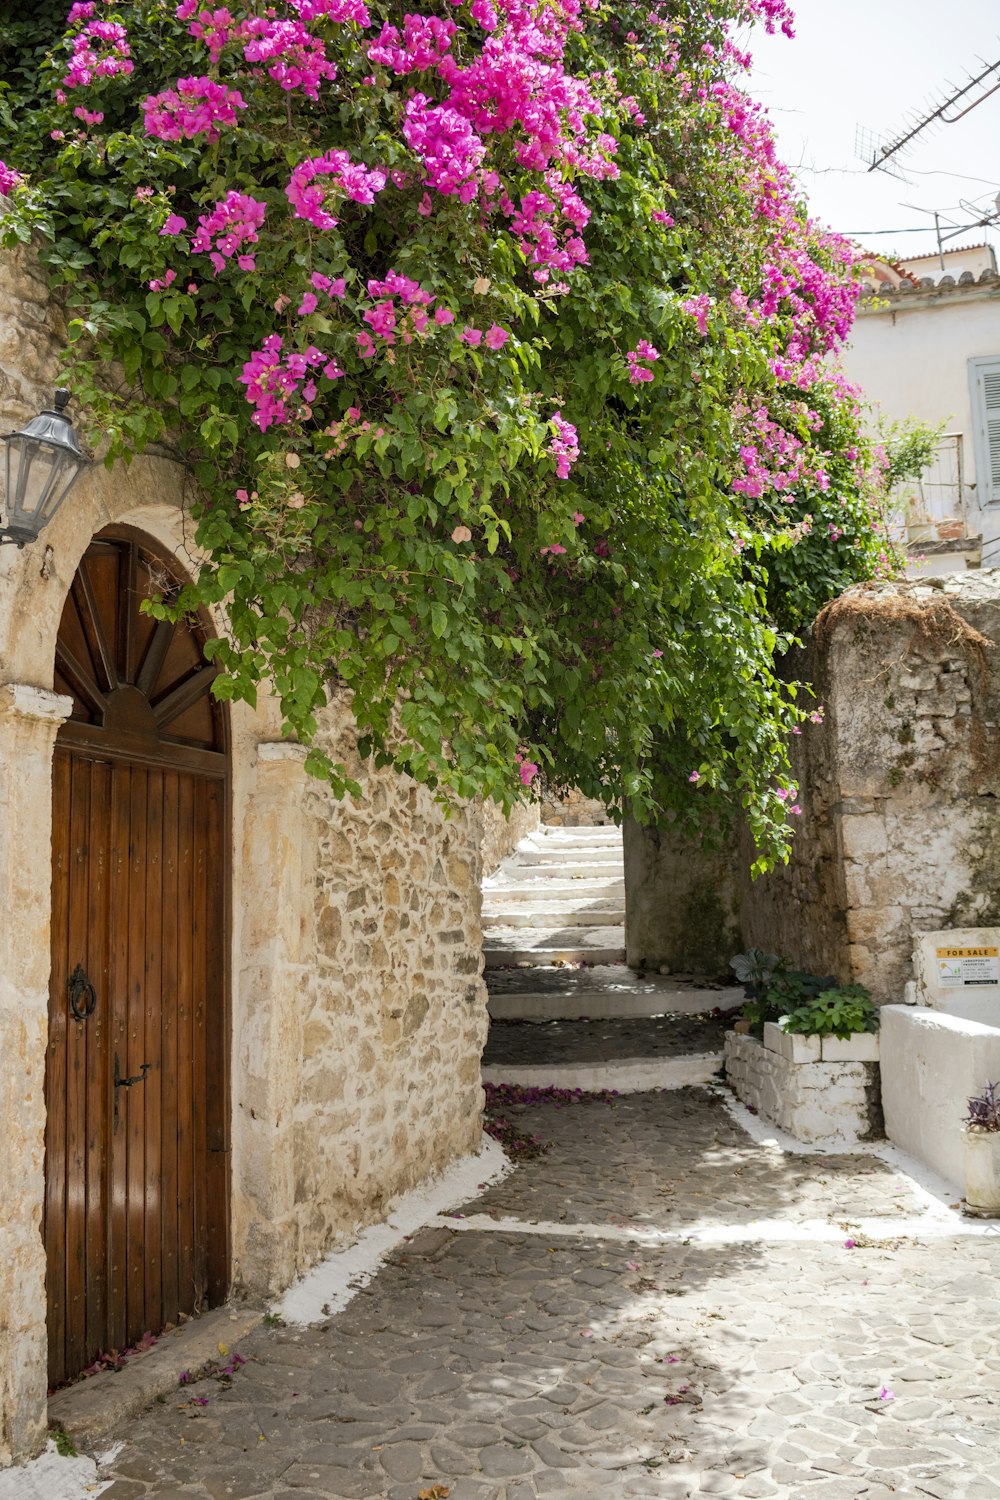 a stone building with a wooden door surrounded by pink flowers